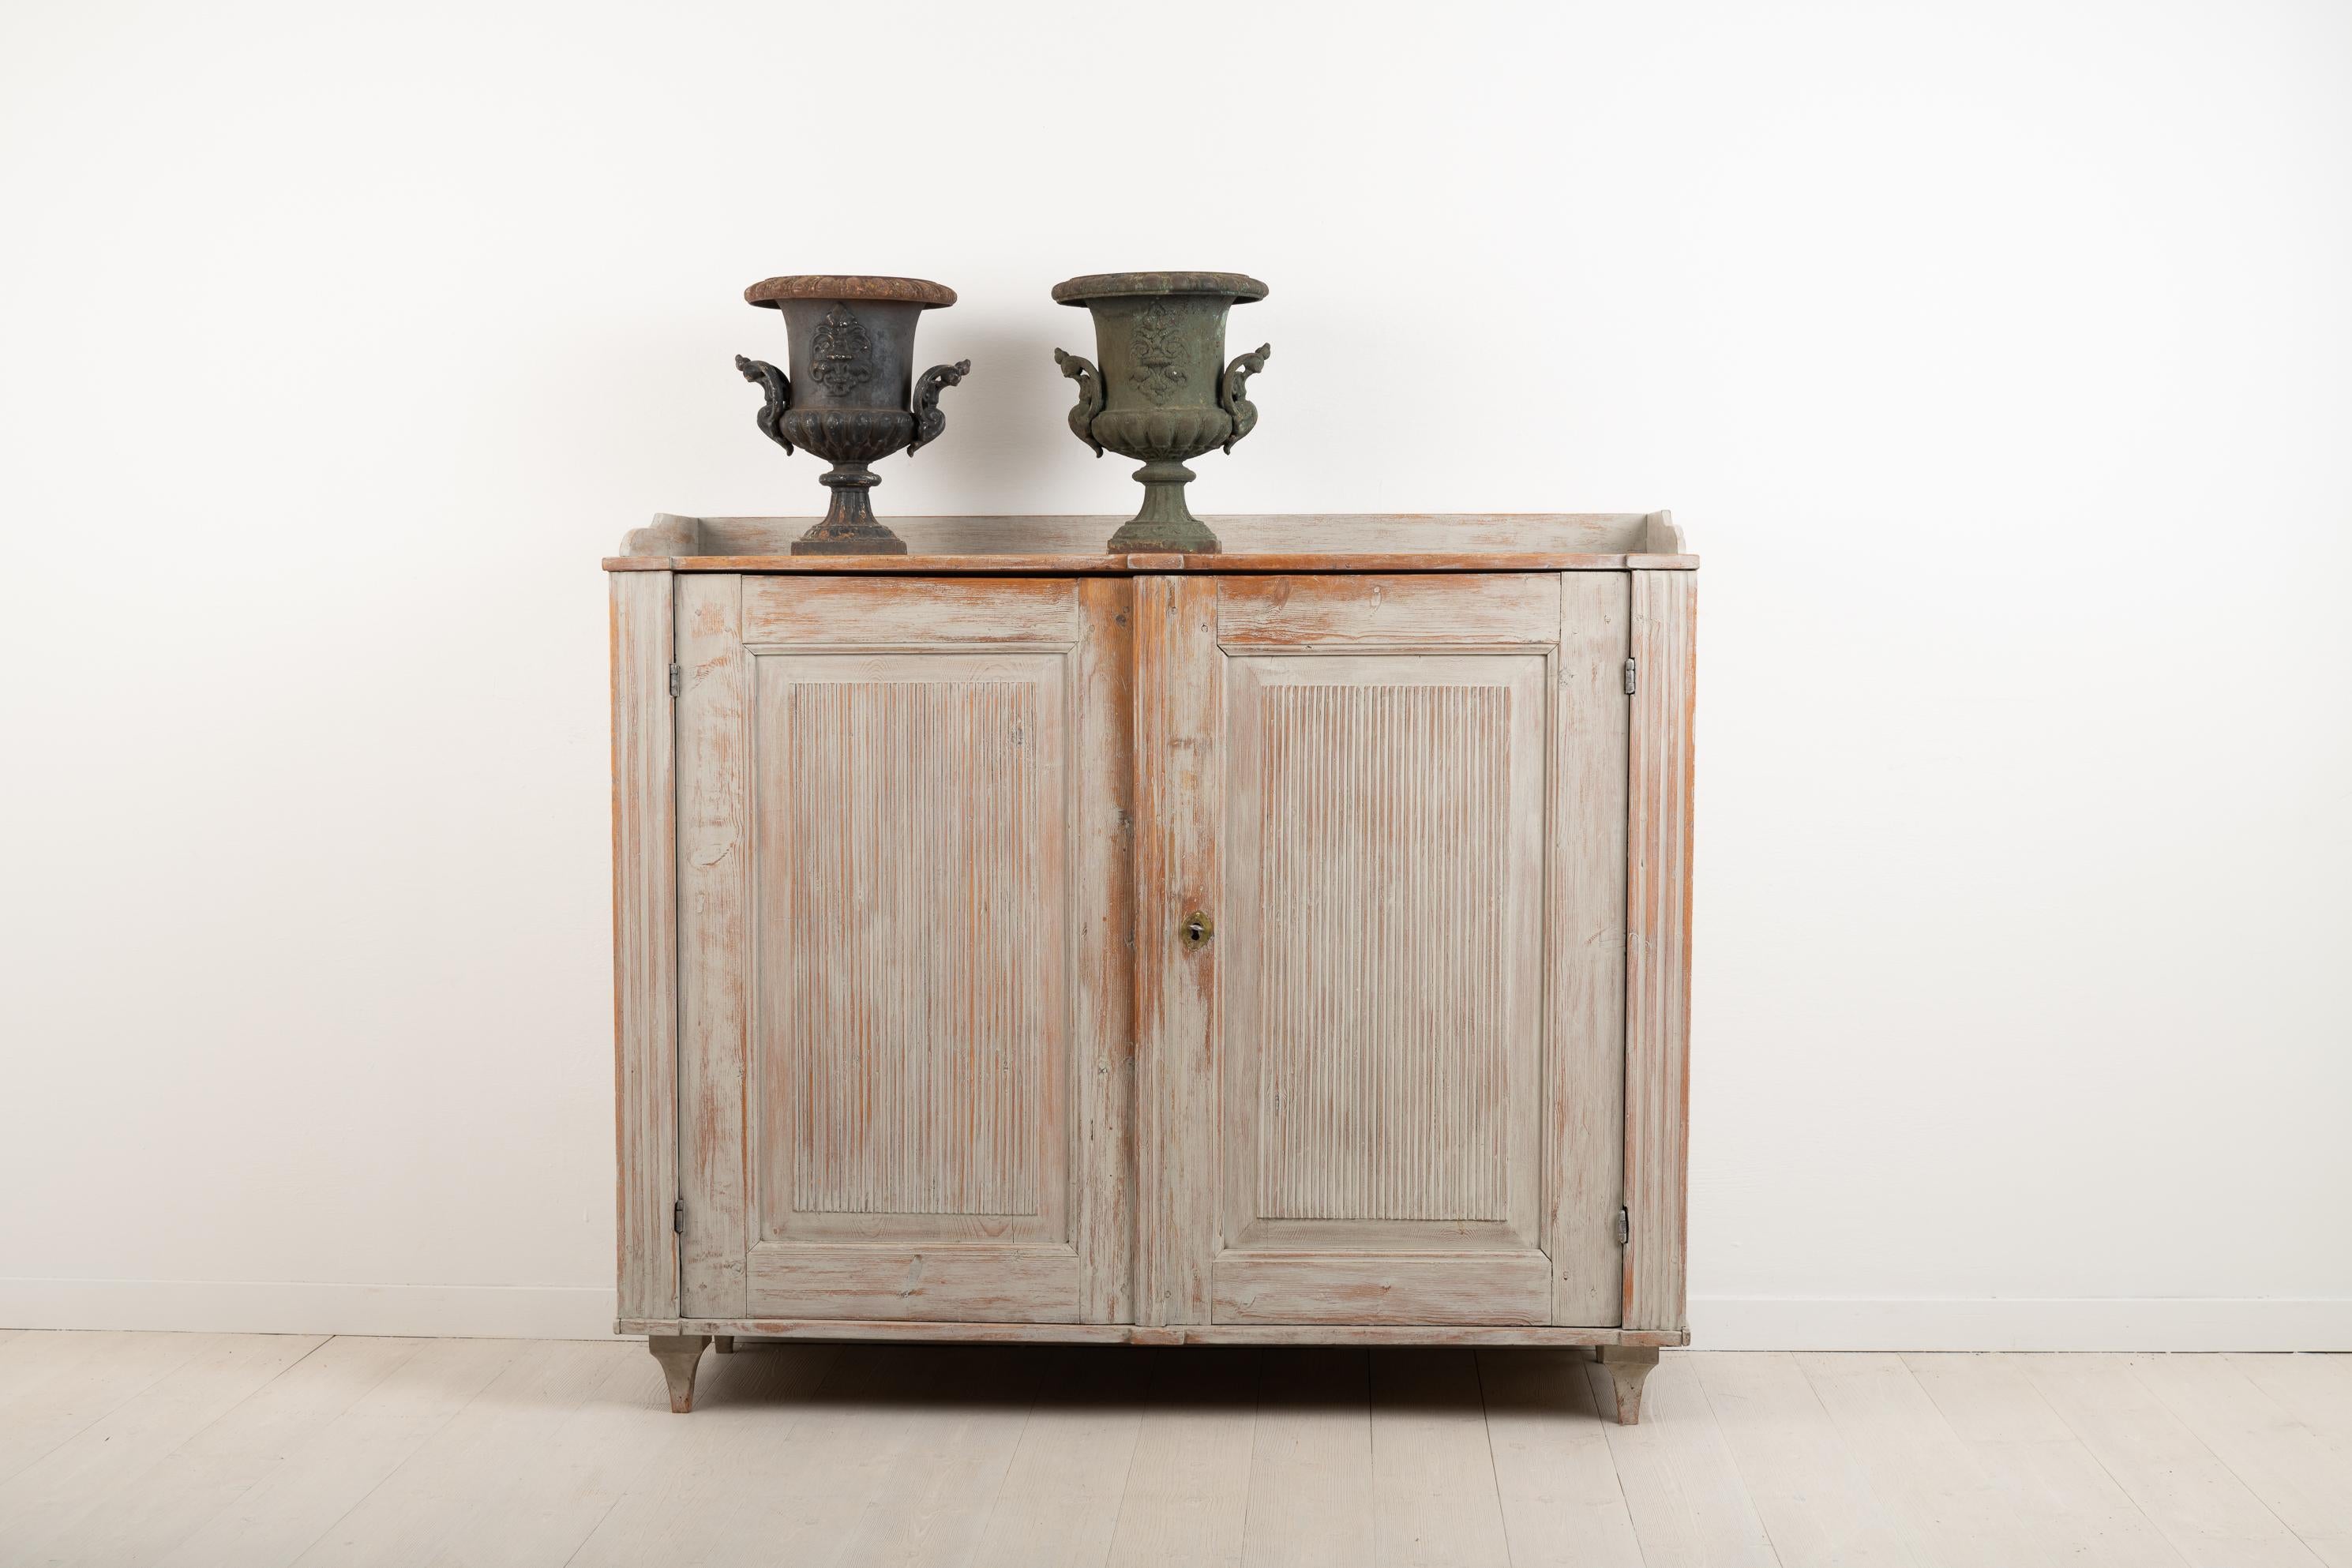 Swedish neoclassic sideboard from the late 18th century. The sideboard is from northern Sweden and is made from Swedish pine. It has hand carved wooden decorations such as the ribbed panels on both doors. The lock and key are in fully functional